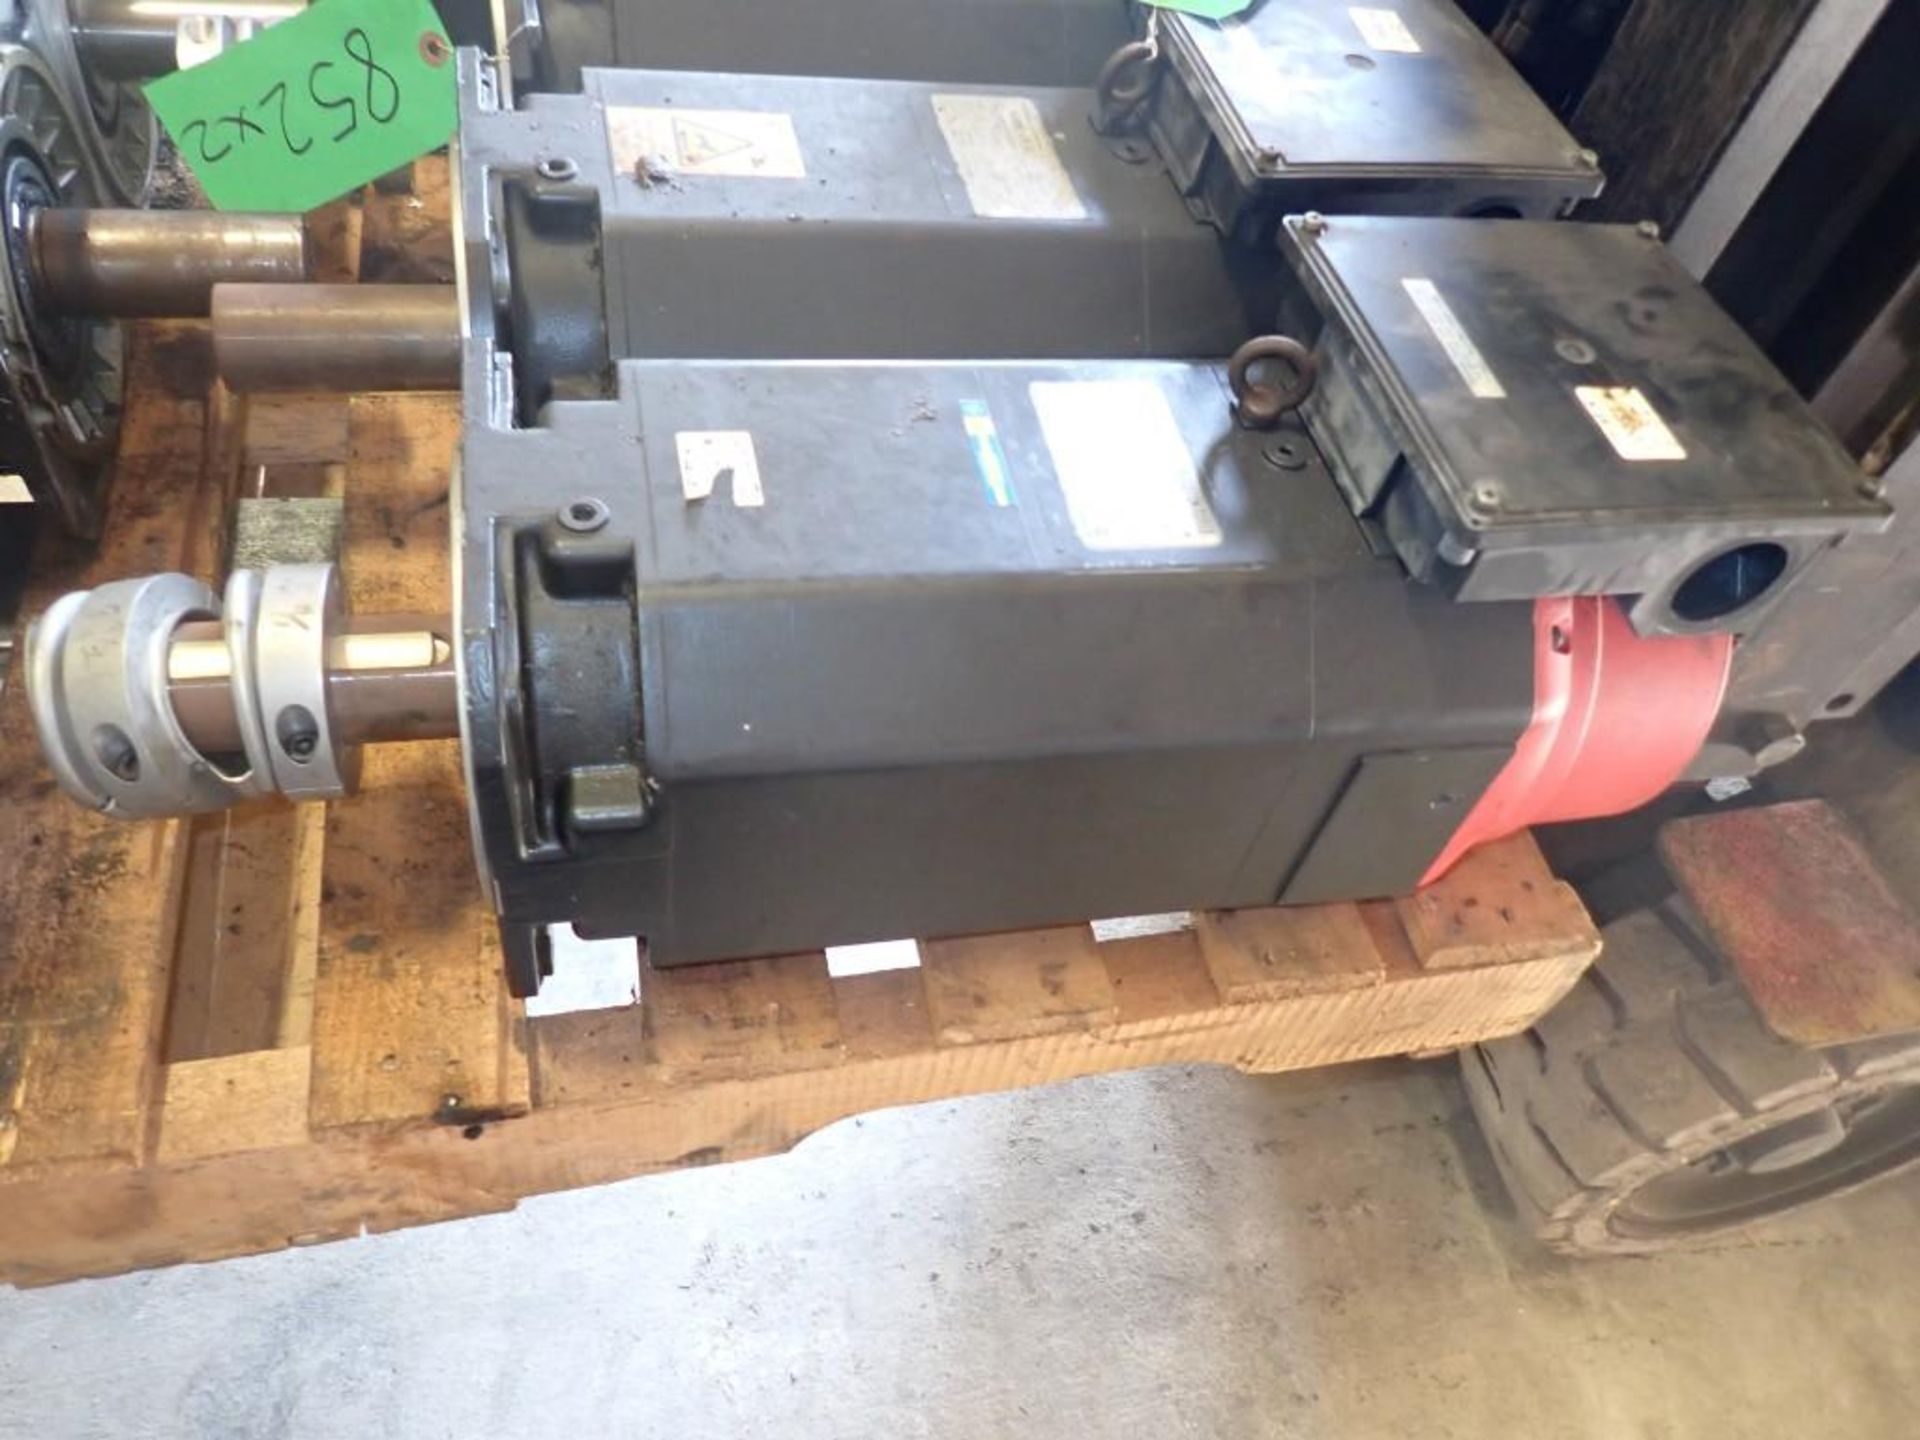 GE Fanuc #A06B-0855-B102/3000-R Spindle Motor - Image 2 of 4